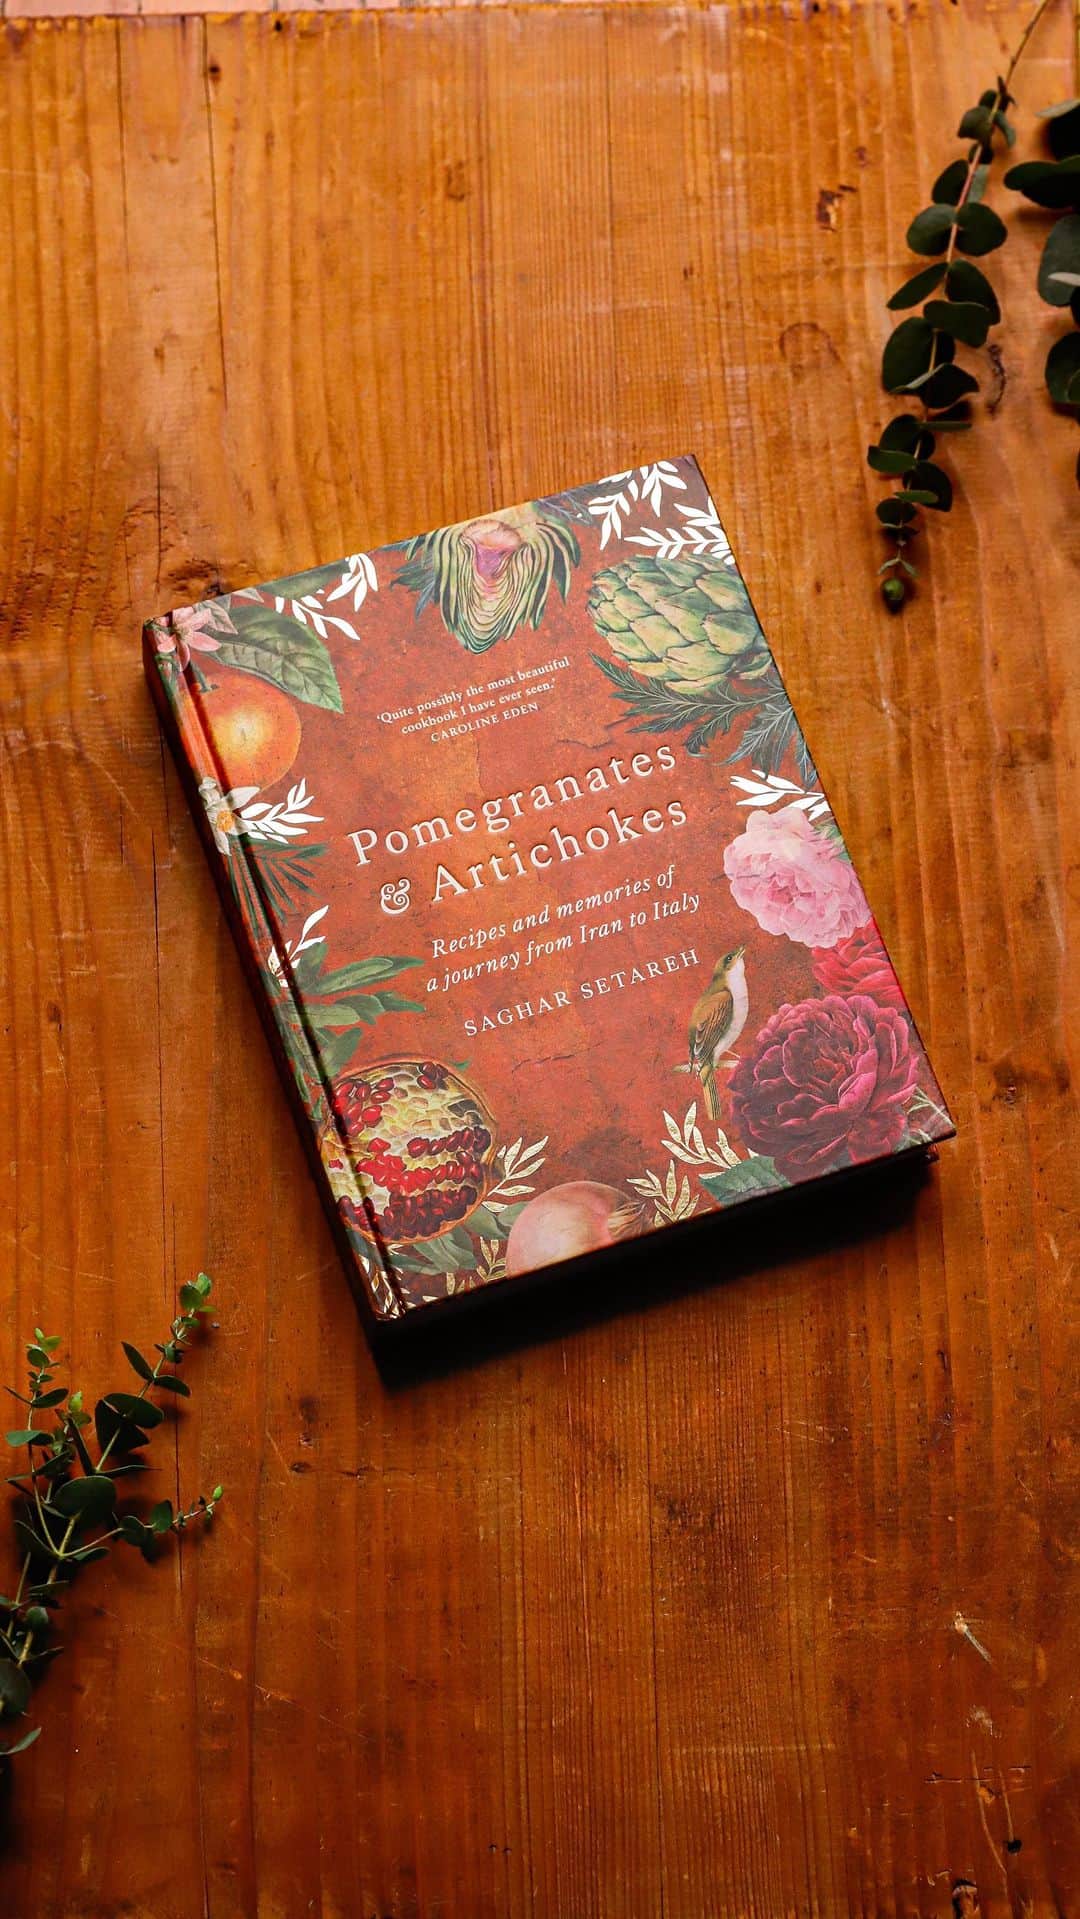 Saghar Setarehのインスタグラム：「#PomegranatesAndArtichokes will be out in exactly 1 month! Thank you for all your birthday wishes! The best gift ever has finally arrived too! Here I am holding my baby at last, and here's a sneak peek for you.  Please consider pre-ordering this book to support my work. The link is in my bio.  Can't wait to share more!   #LabNoonCookbook #FlavorsAndEncounters  Music by Geoffrey Harvey from Pixabay」